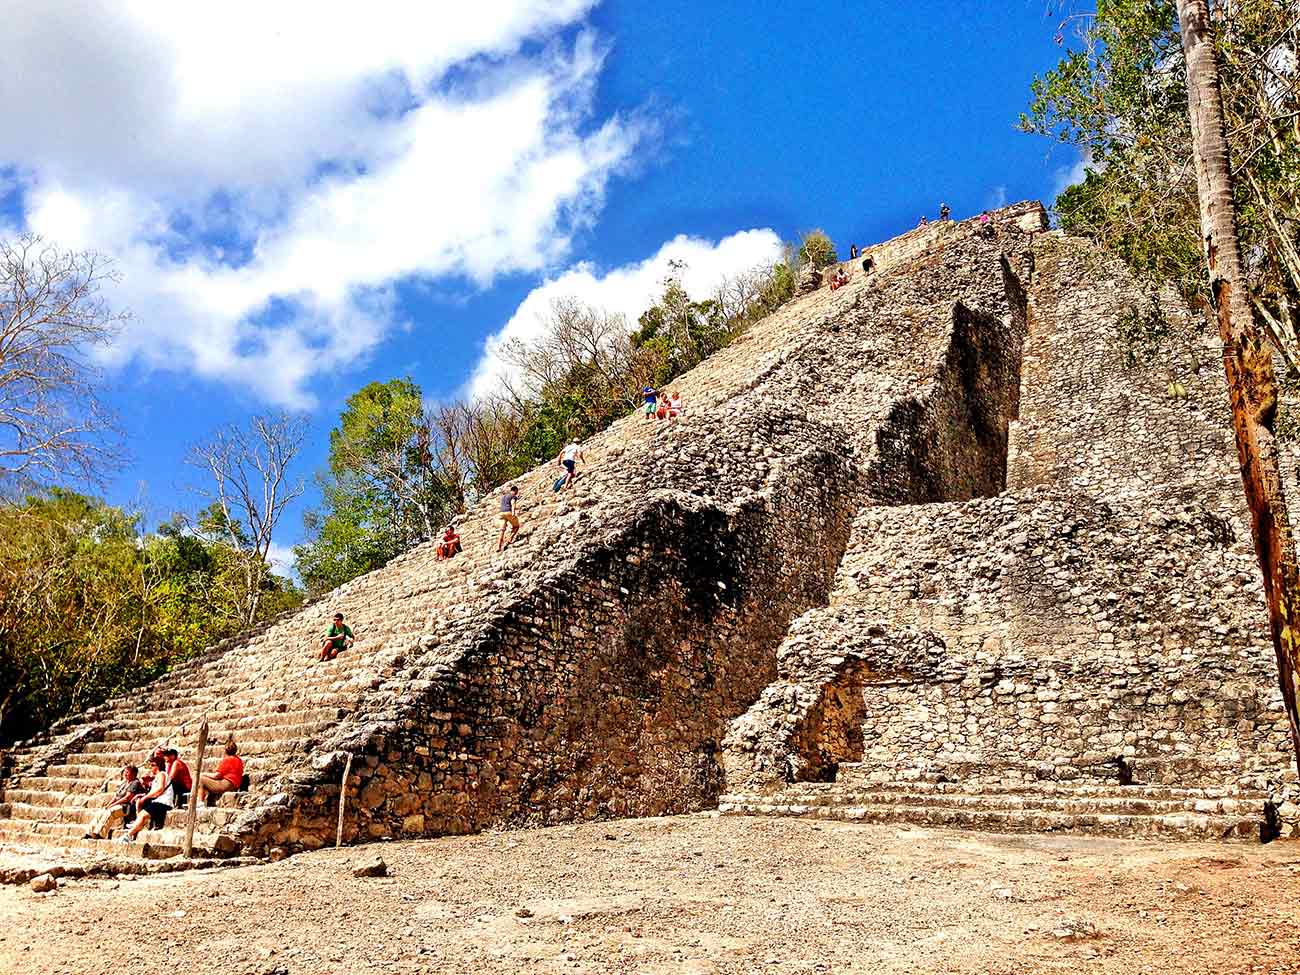 Tour G. Coba and Cenote Tamcach ha & Mayan Village | Group Discount Rate $145.US dollars per person